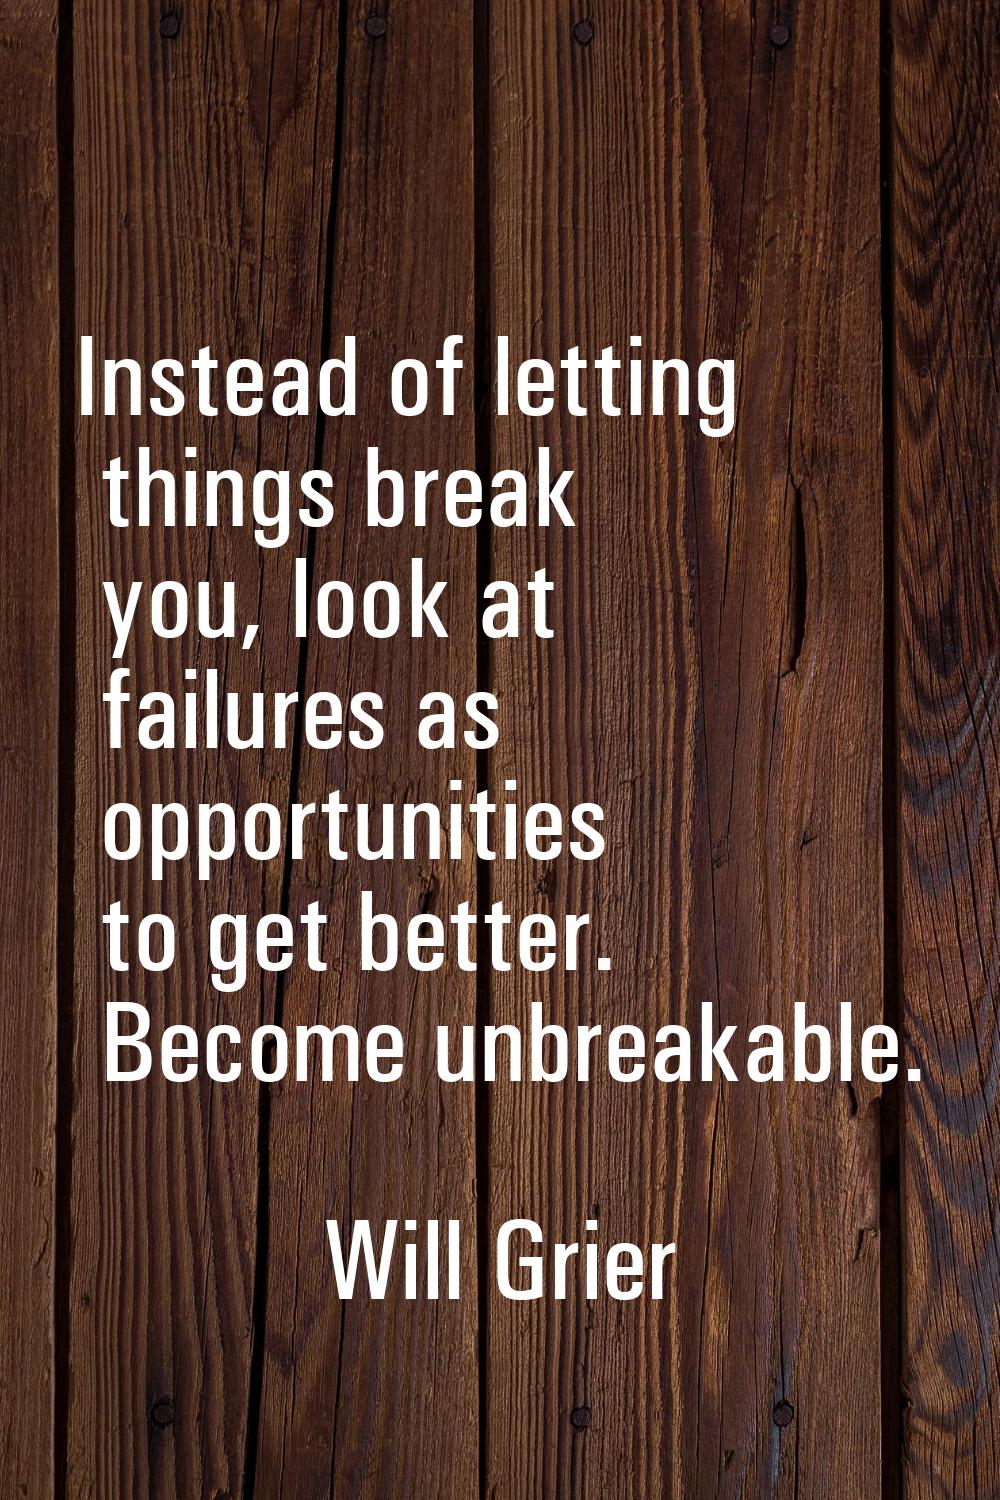 Instead of letting things break you, look at failures as opportunities to get better. Become unbrea